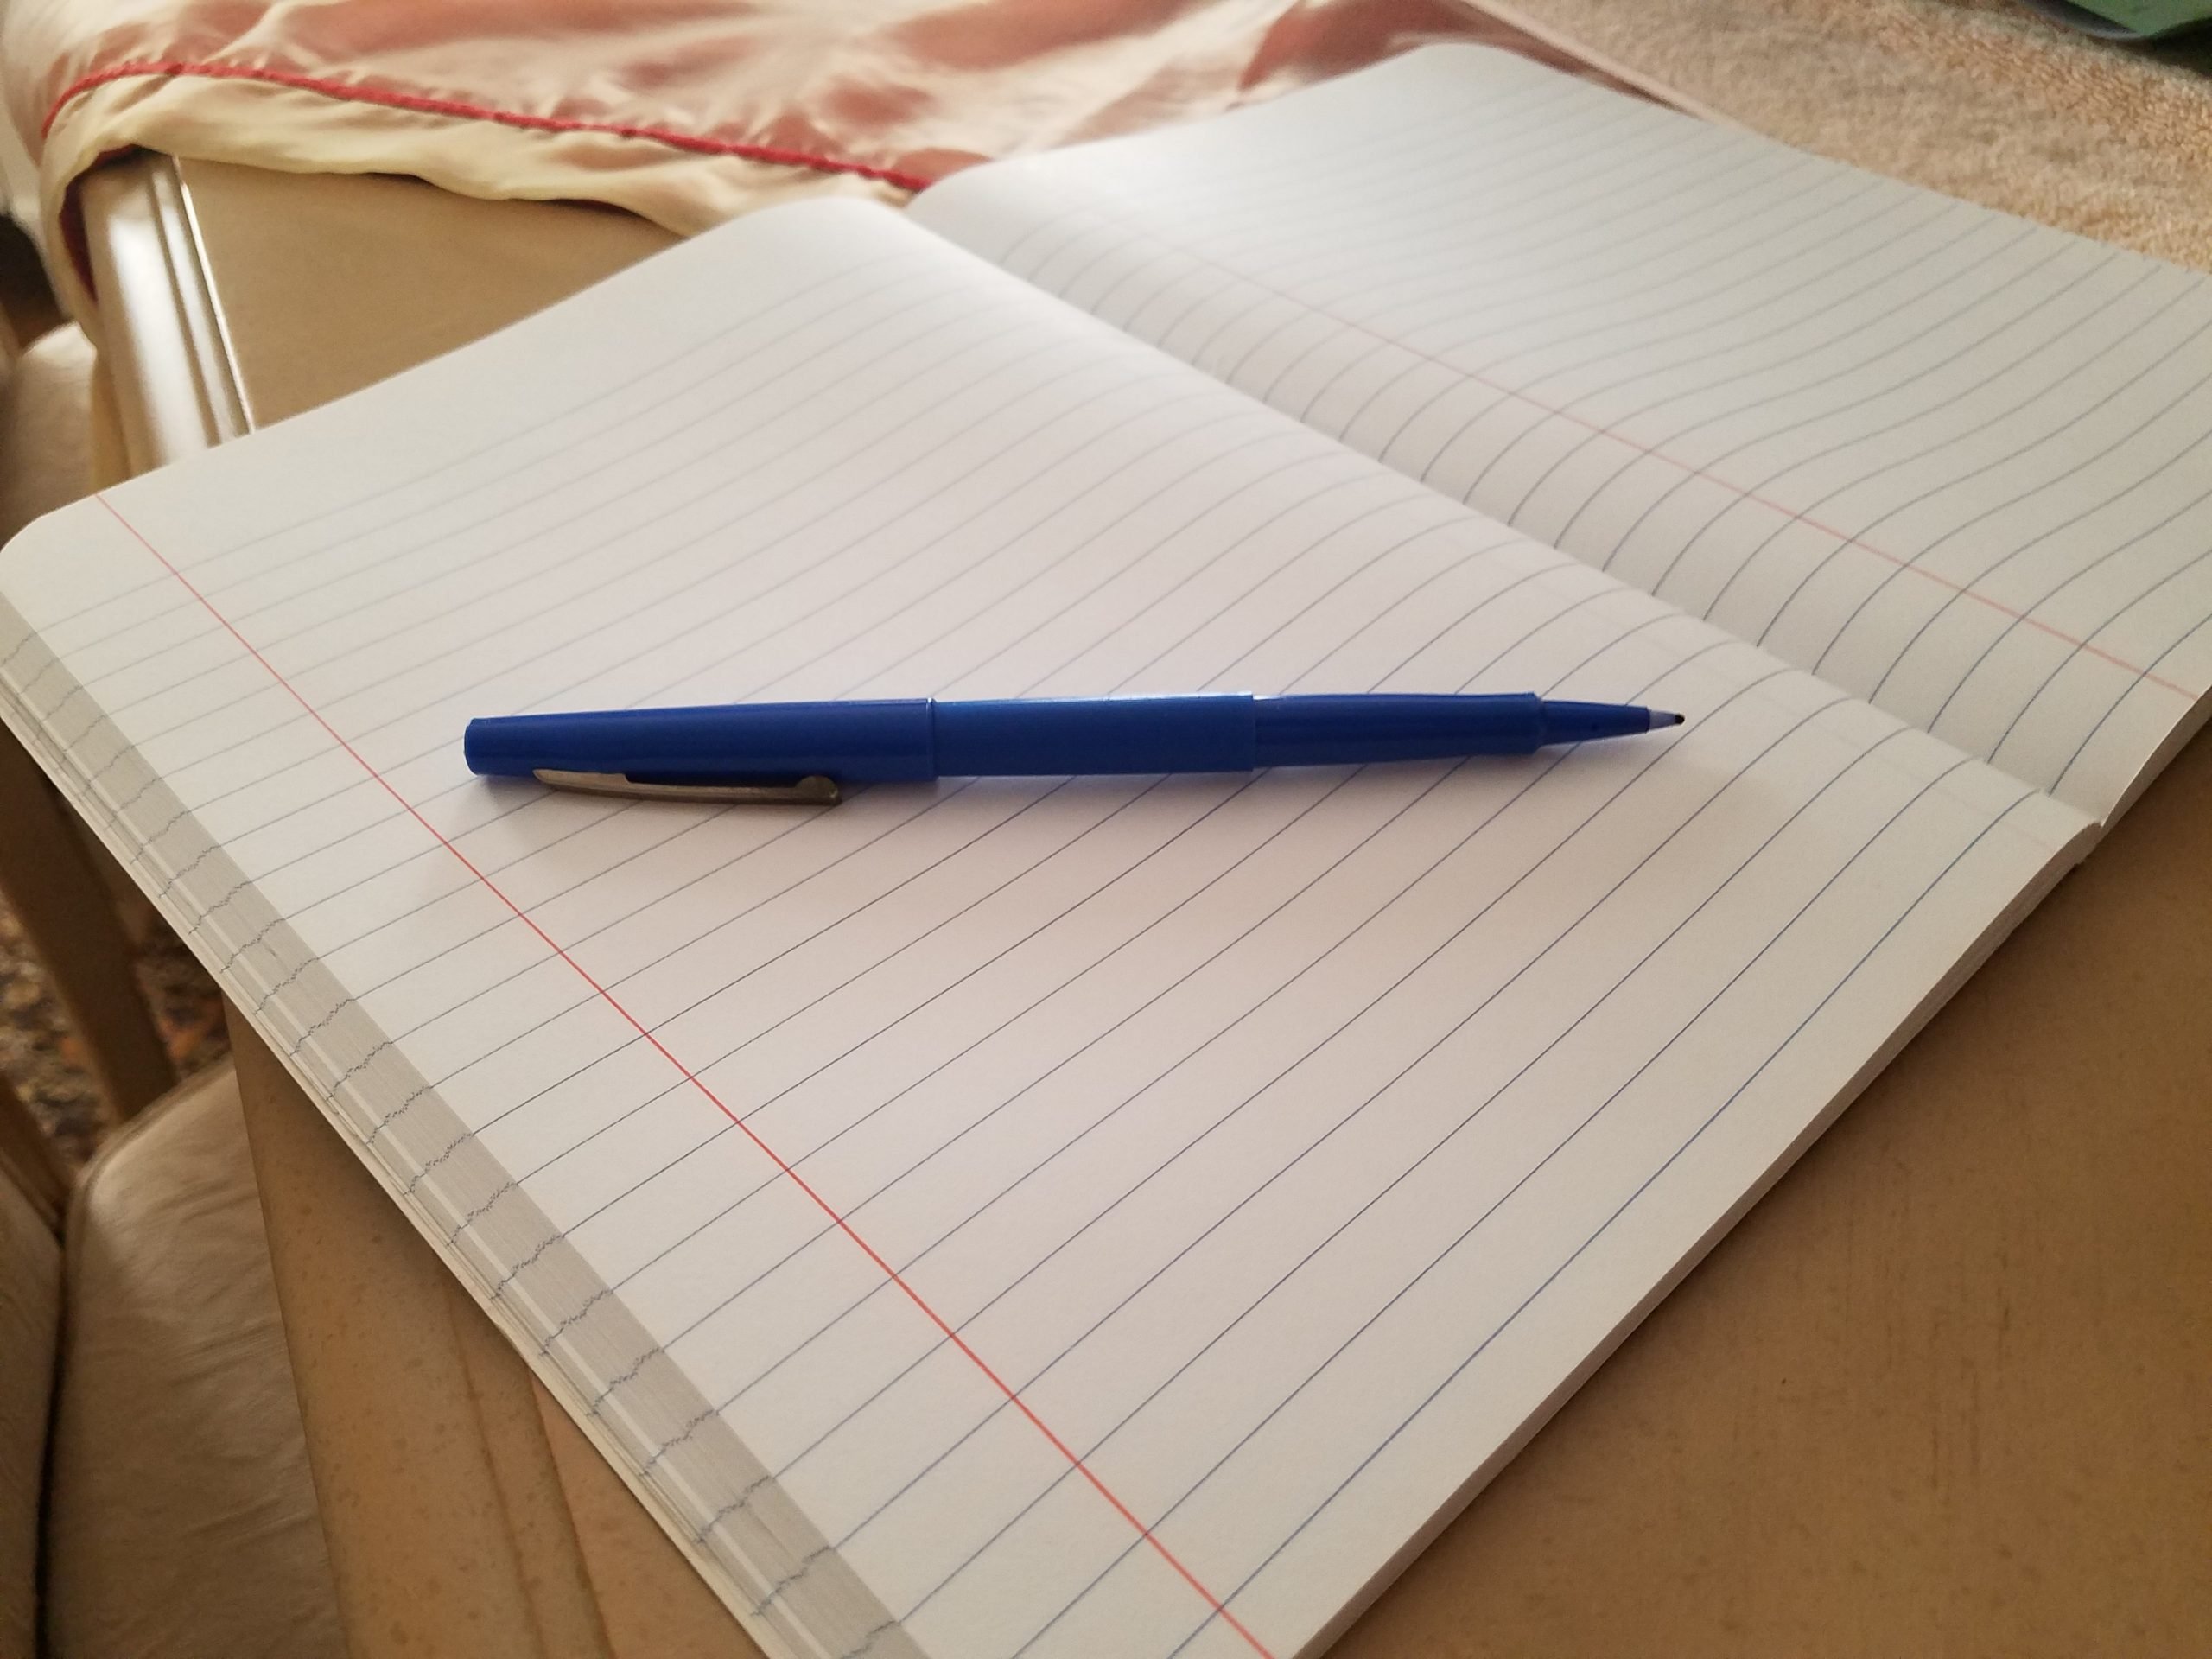 Notebooks have very specific margins